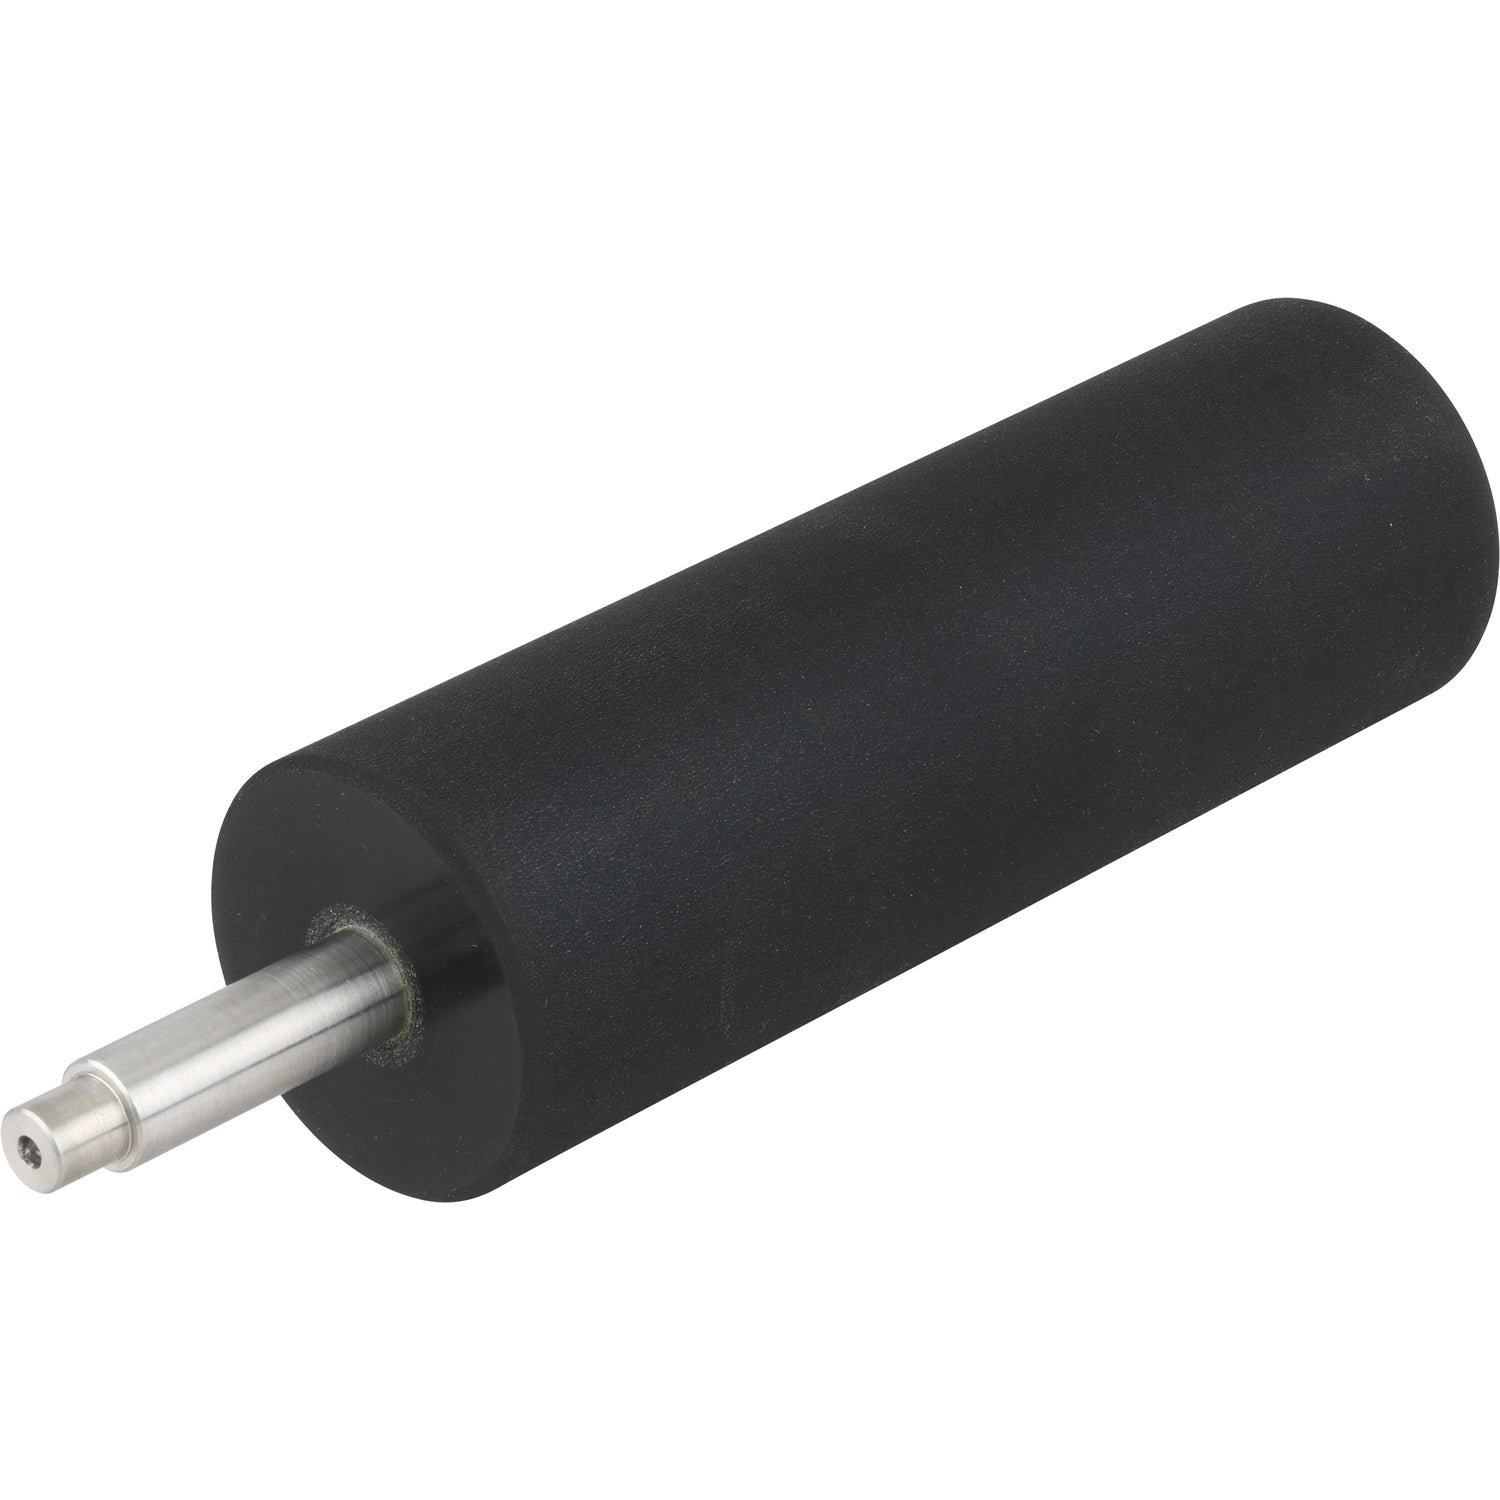 Black cylindrical rubber roller with stainless steel axle extending outward. Part shown on white background. 